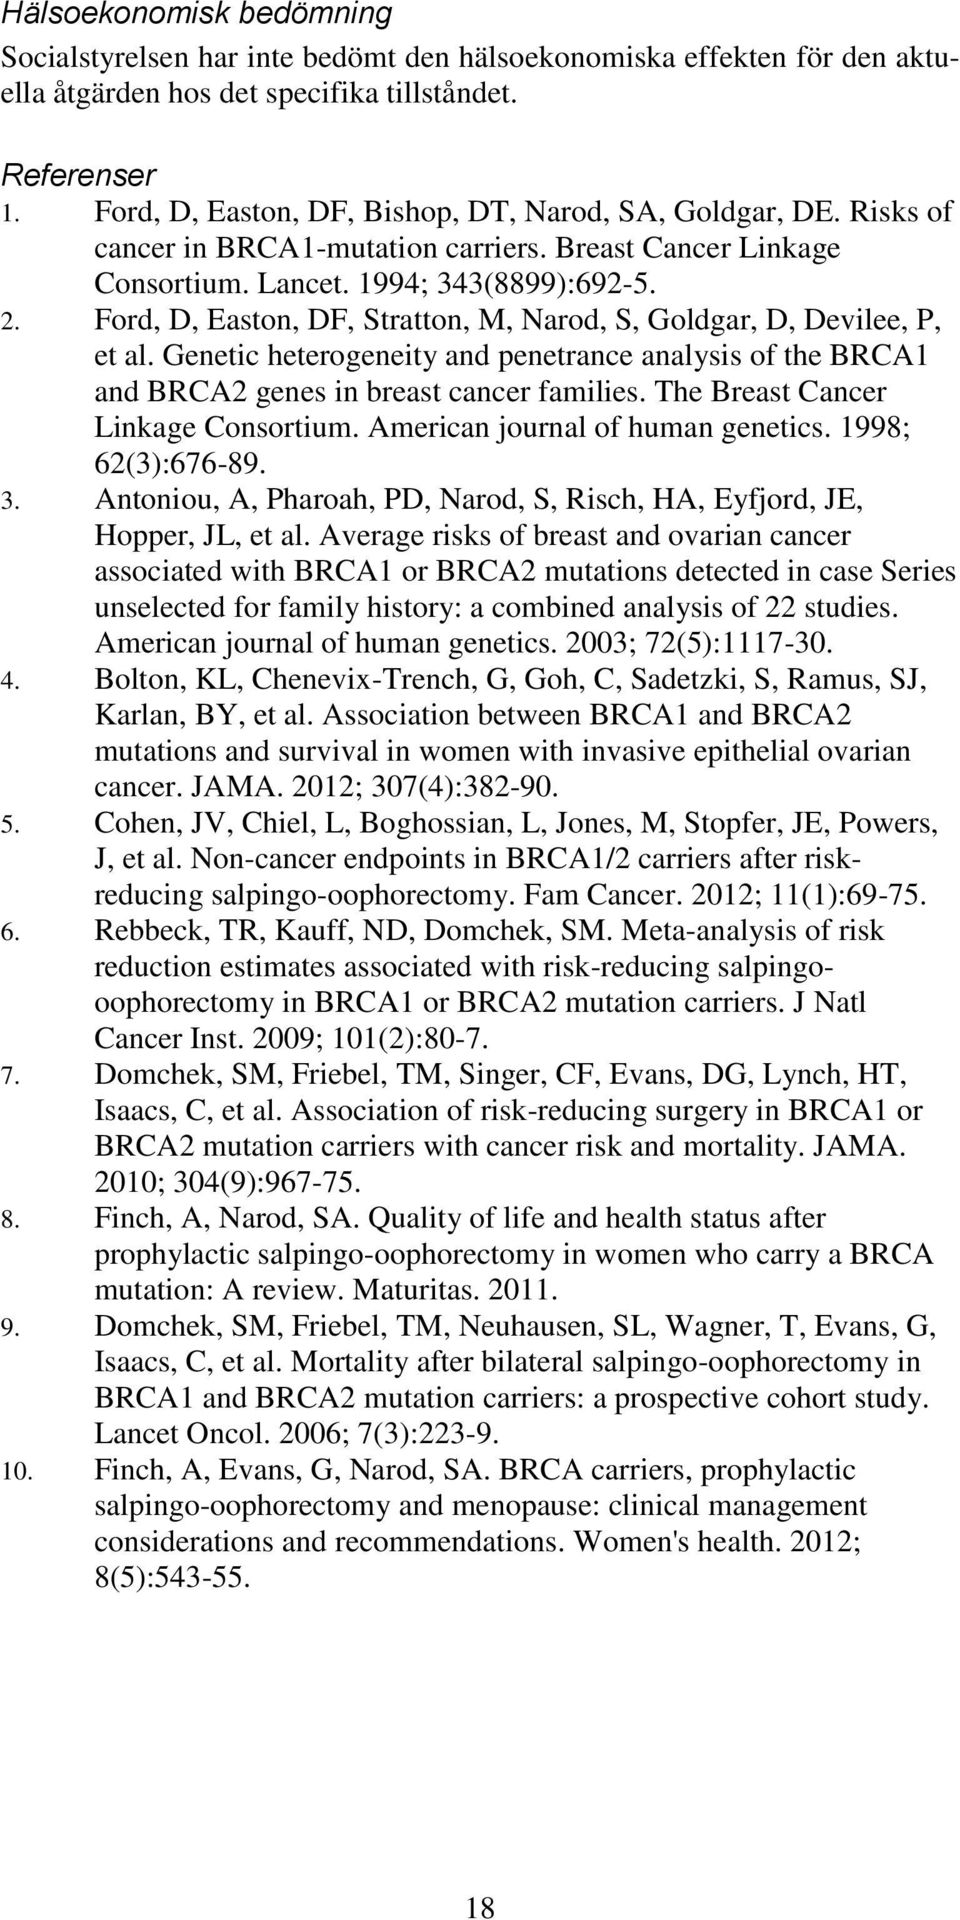 Ford, D, Easton, DF, Stratton, M, Narod, S, Goldgar, D, Devilee, P, et al. Genetic heterogeneity and penetrance analysis of the BRCA1 and BRCA2 genes in breast cancer families.